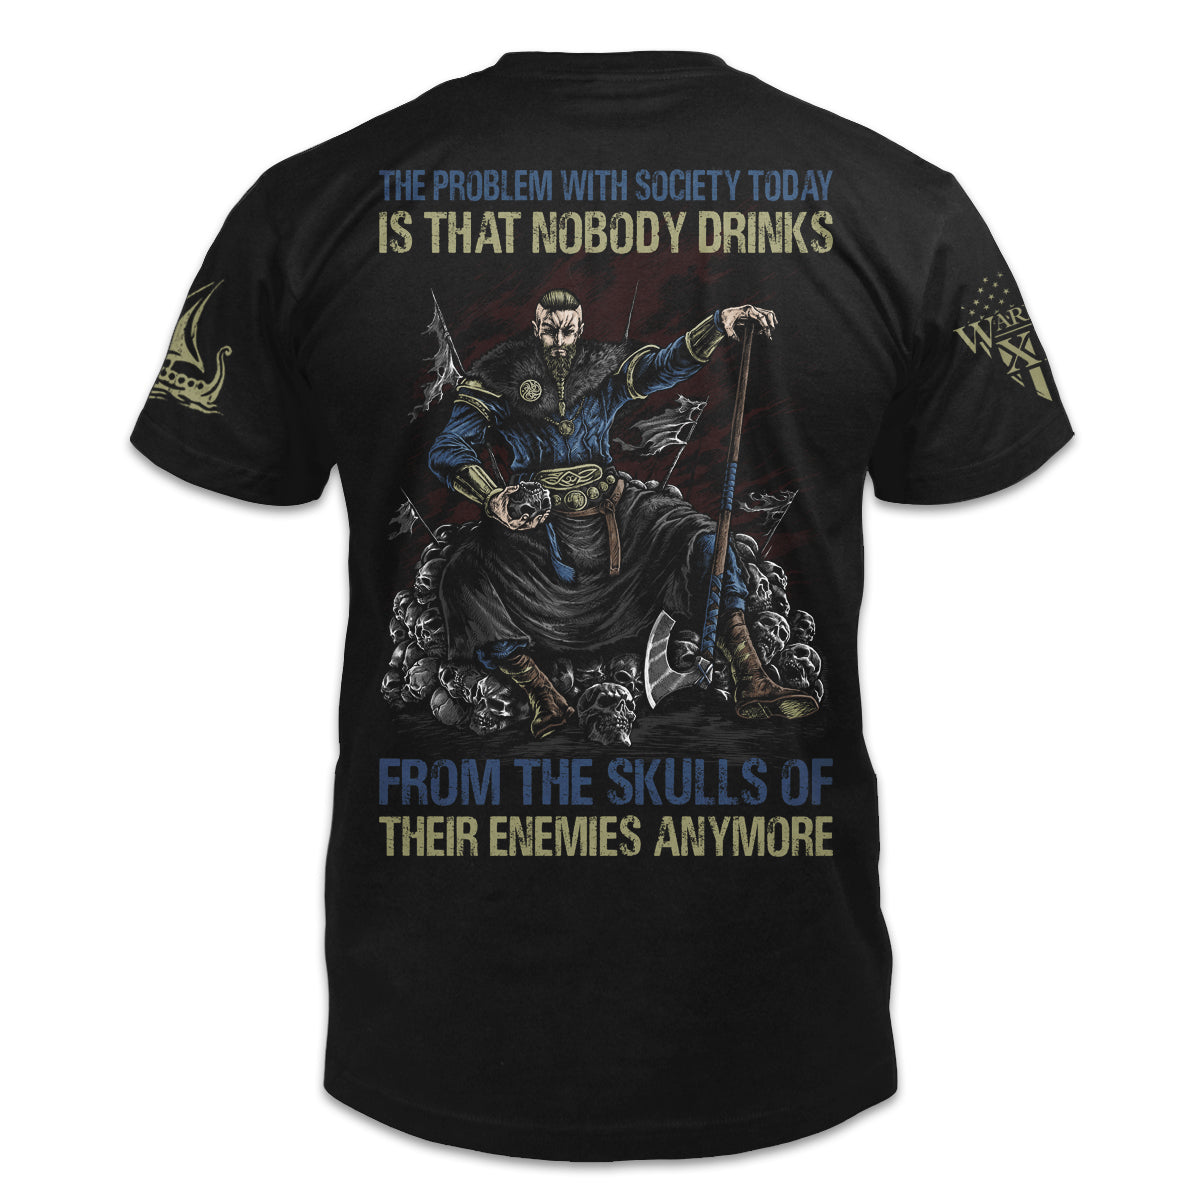 A black t-shirt with the words "The problem with society today is that nobody drinks from the skulls of their enemies anymore" with a warrior printed on the back of the shirt.